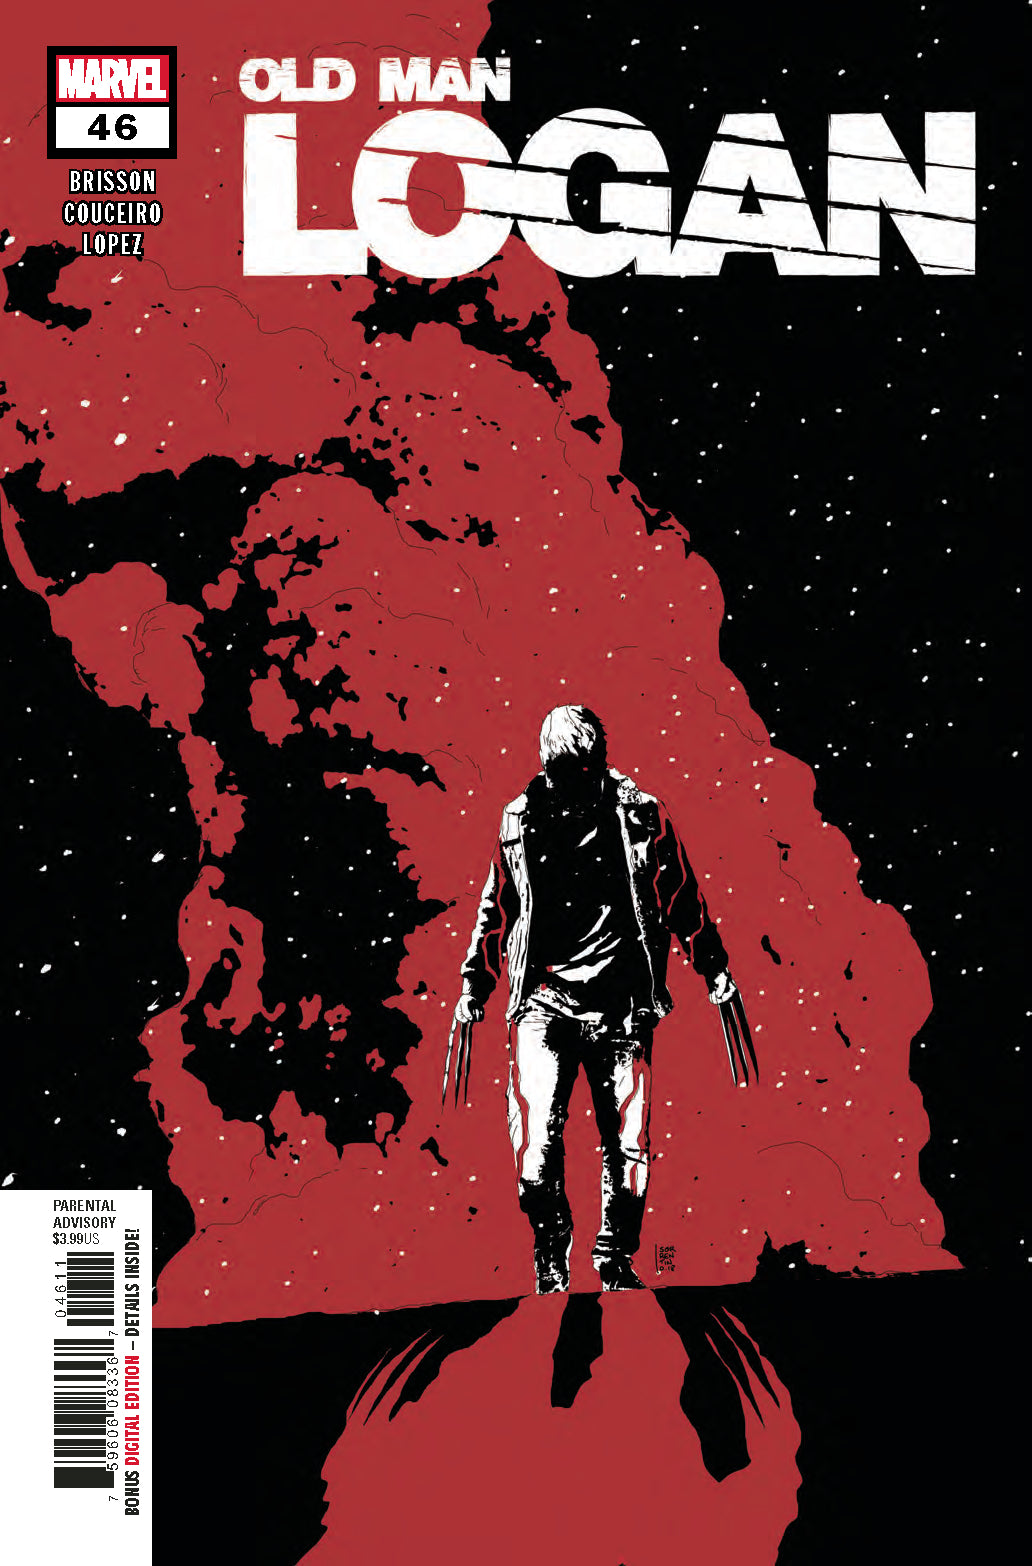 Photo of Old Man Logan Issue 46 comic sold by Stronghold Collectibles